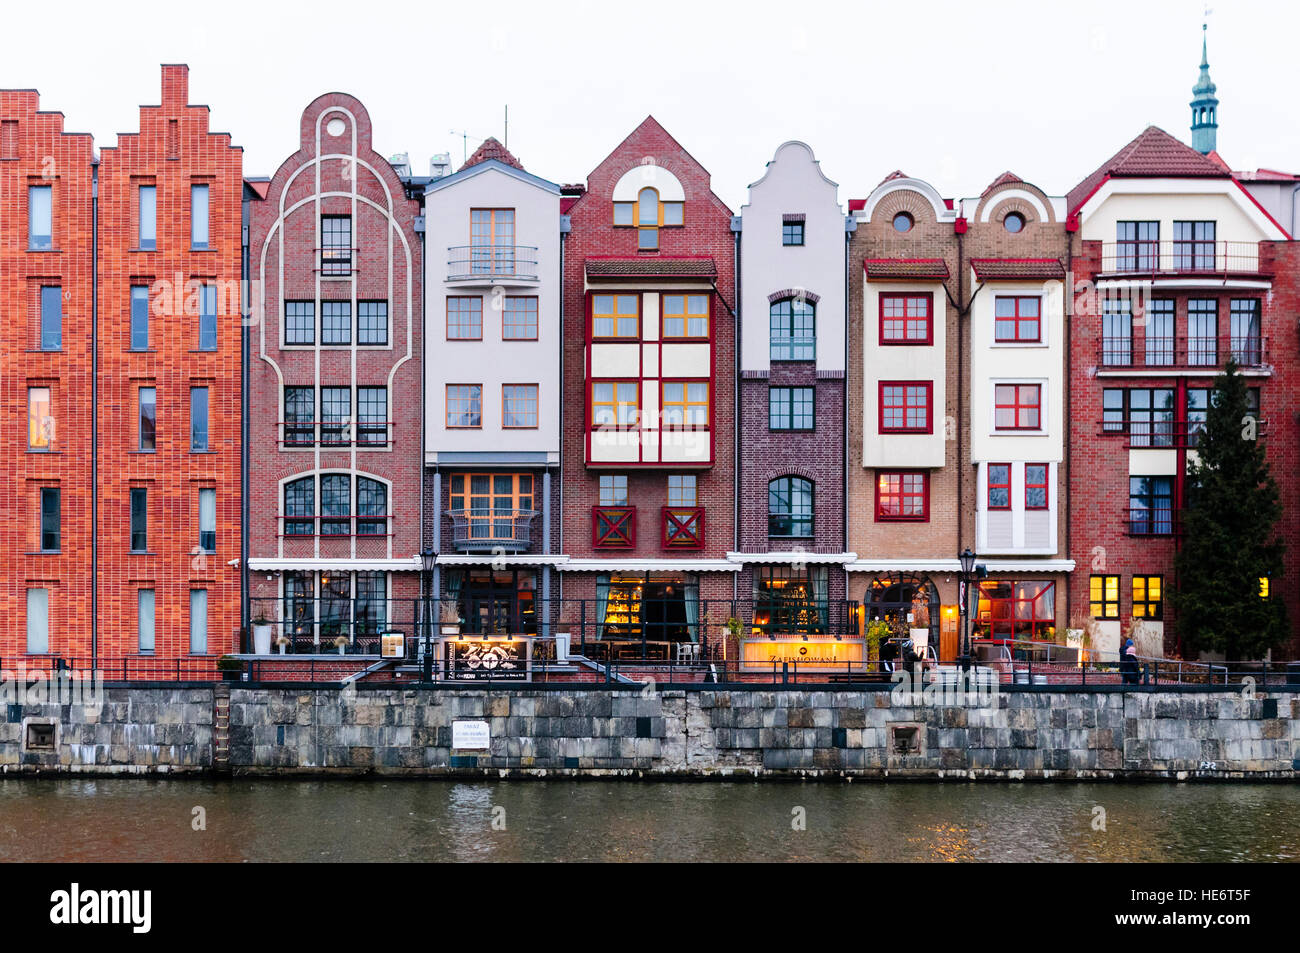 Buildings on the banks of the Motława River, Gdansk, Poland Stock Photo